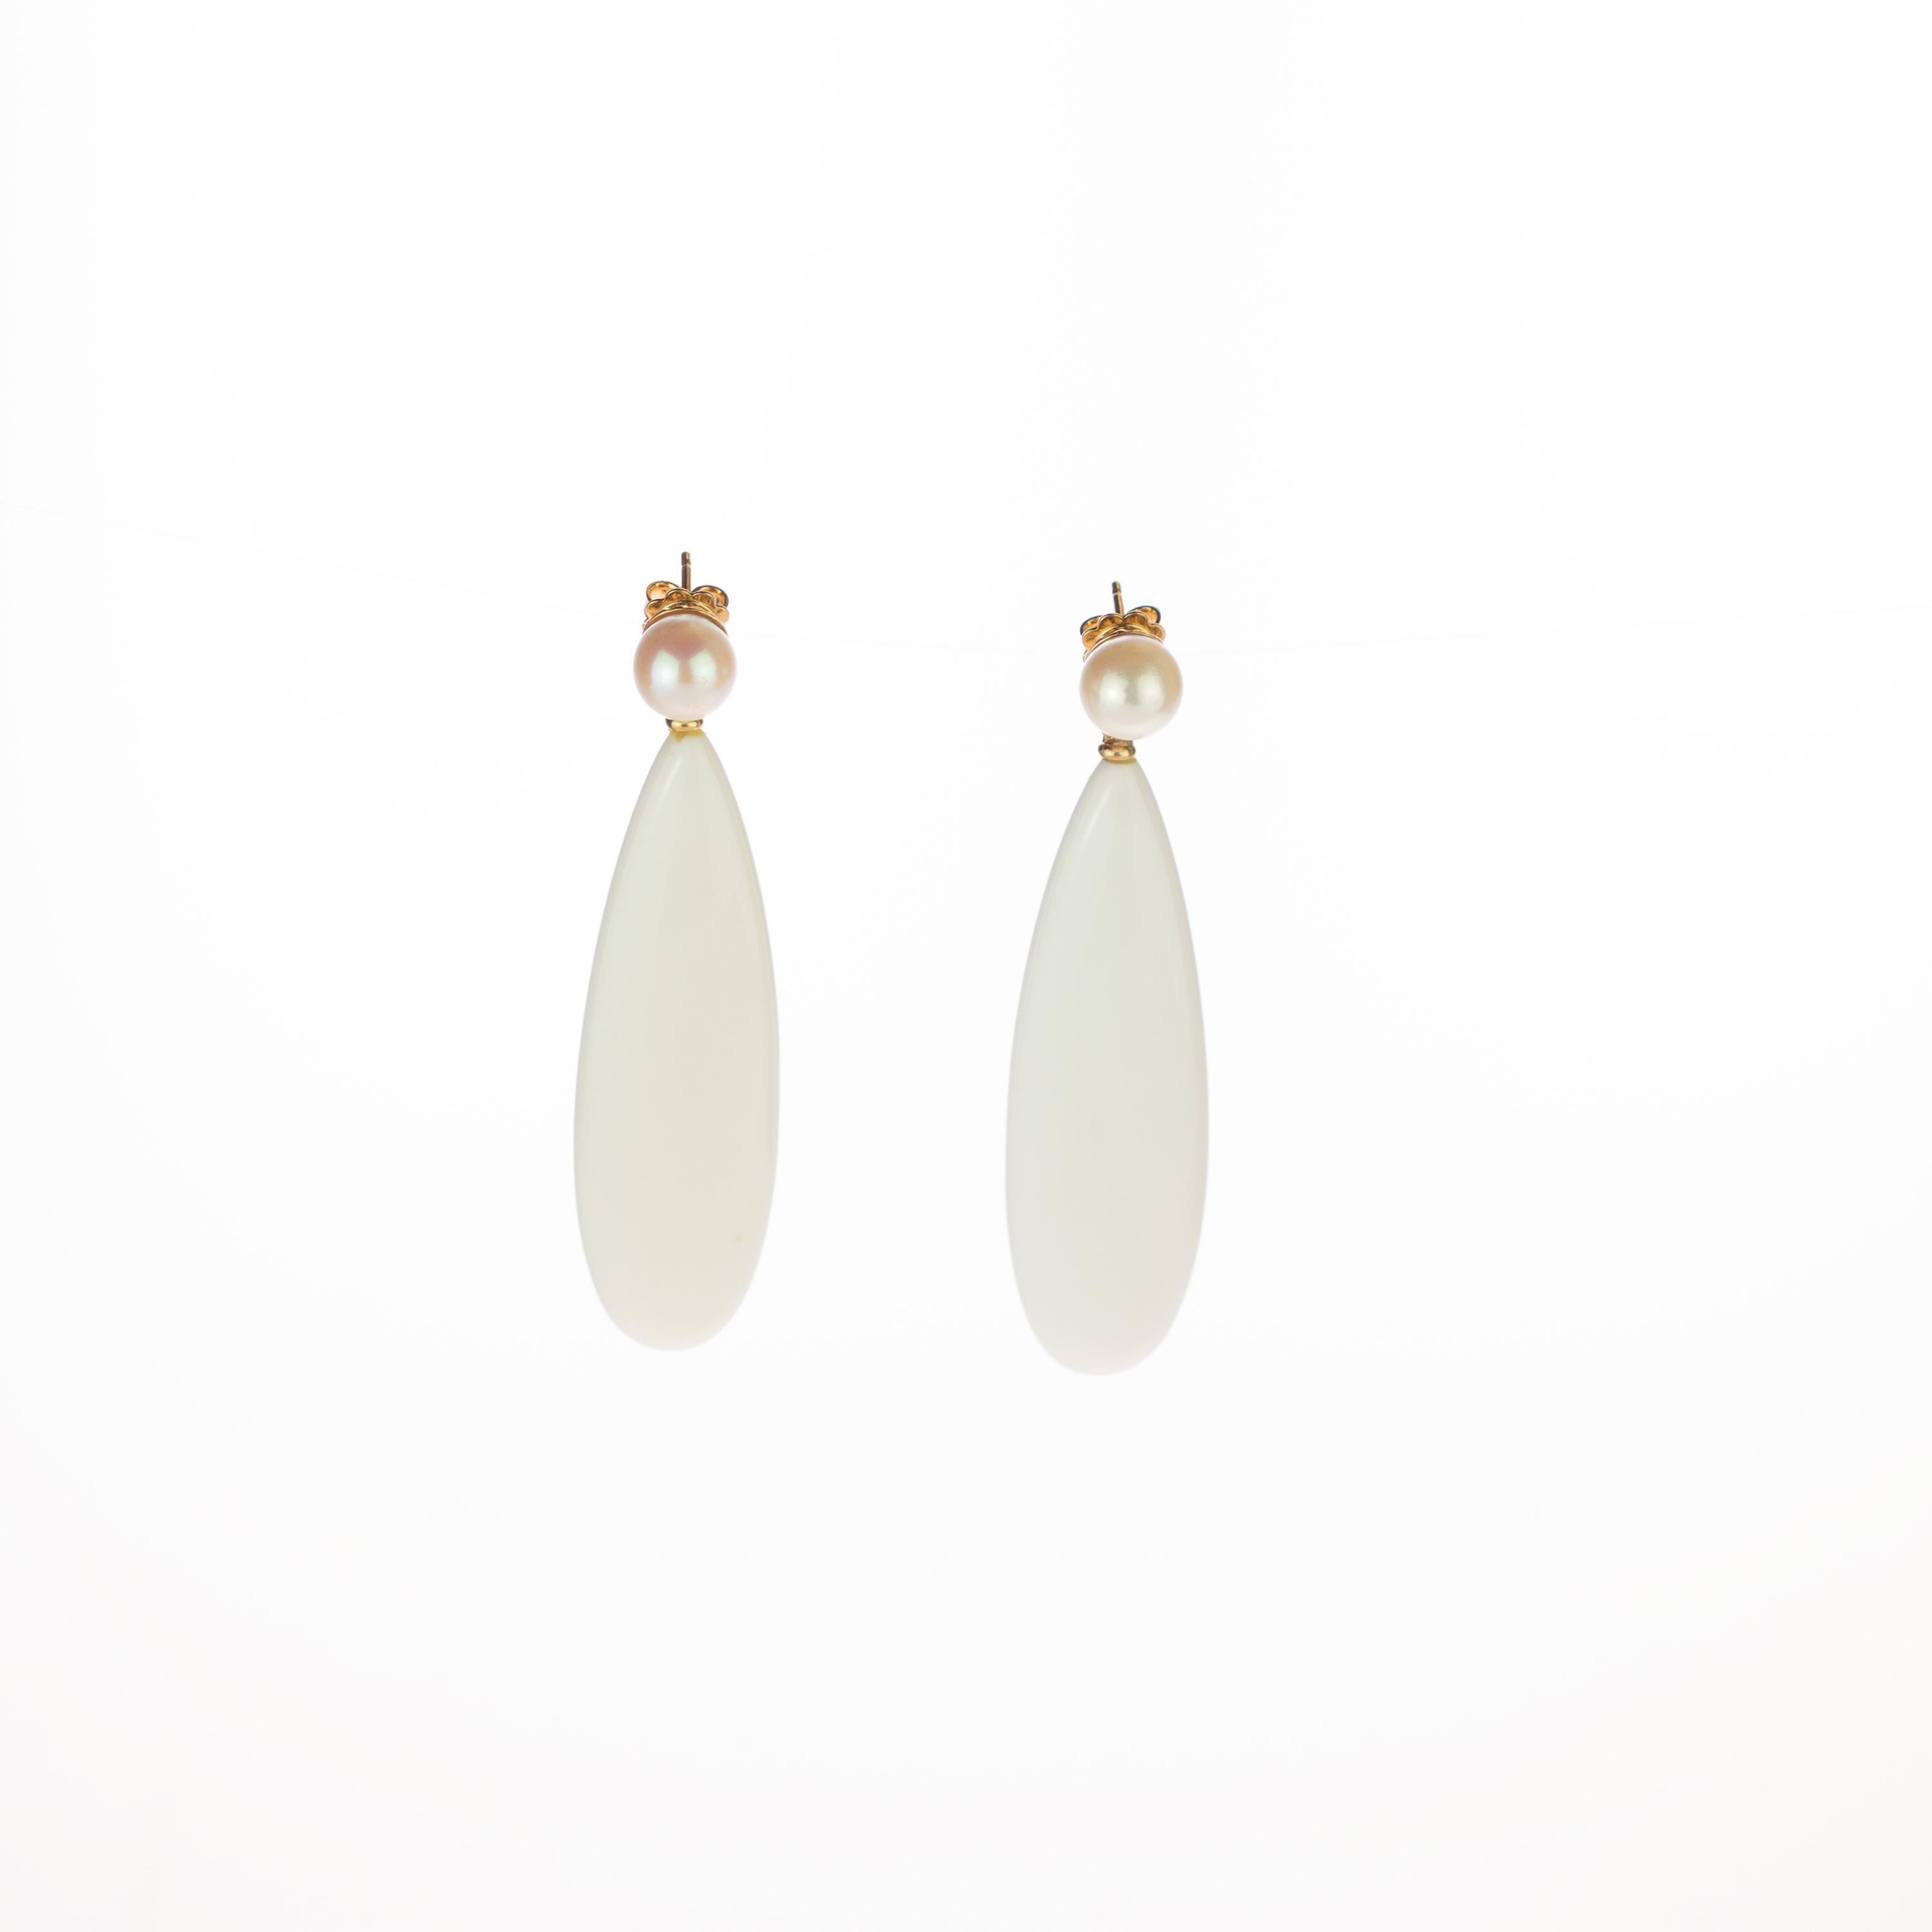 Crafted earrings of natural pearls with an stunning white agate pear teardrop design that combine voluminous round shapes with a matte white color. Resulting in flat, free-spirited pieces with a charming elegance. Held by 18 karat yellow gold that